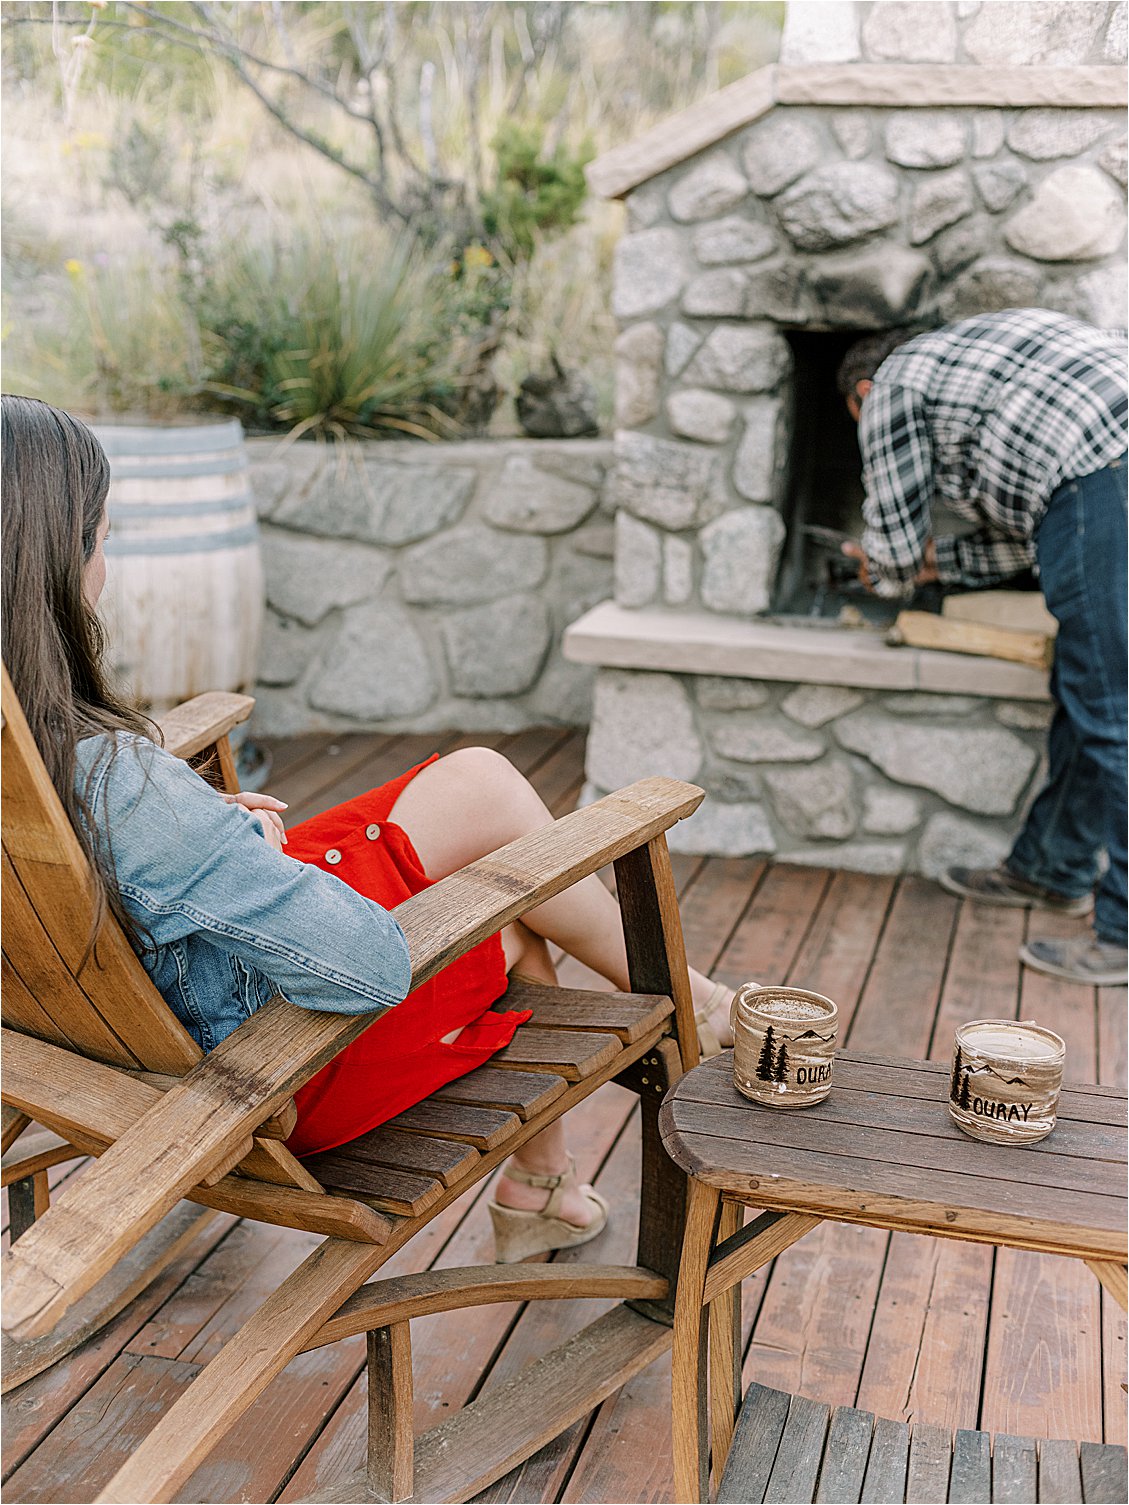 Fireside Engagement Session in Colorado by Destination Film Wedding Photographer, Renee Hollingshead